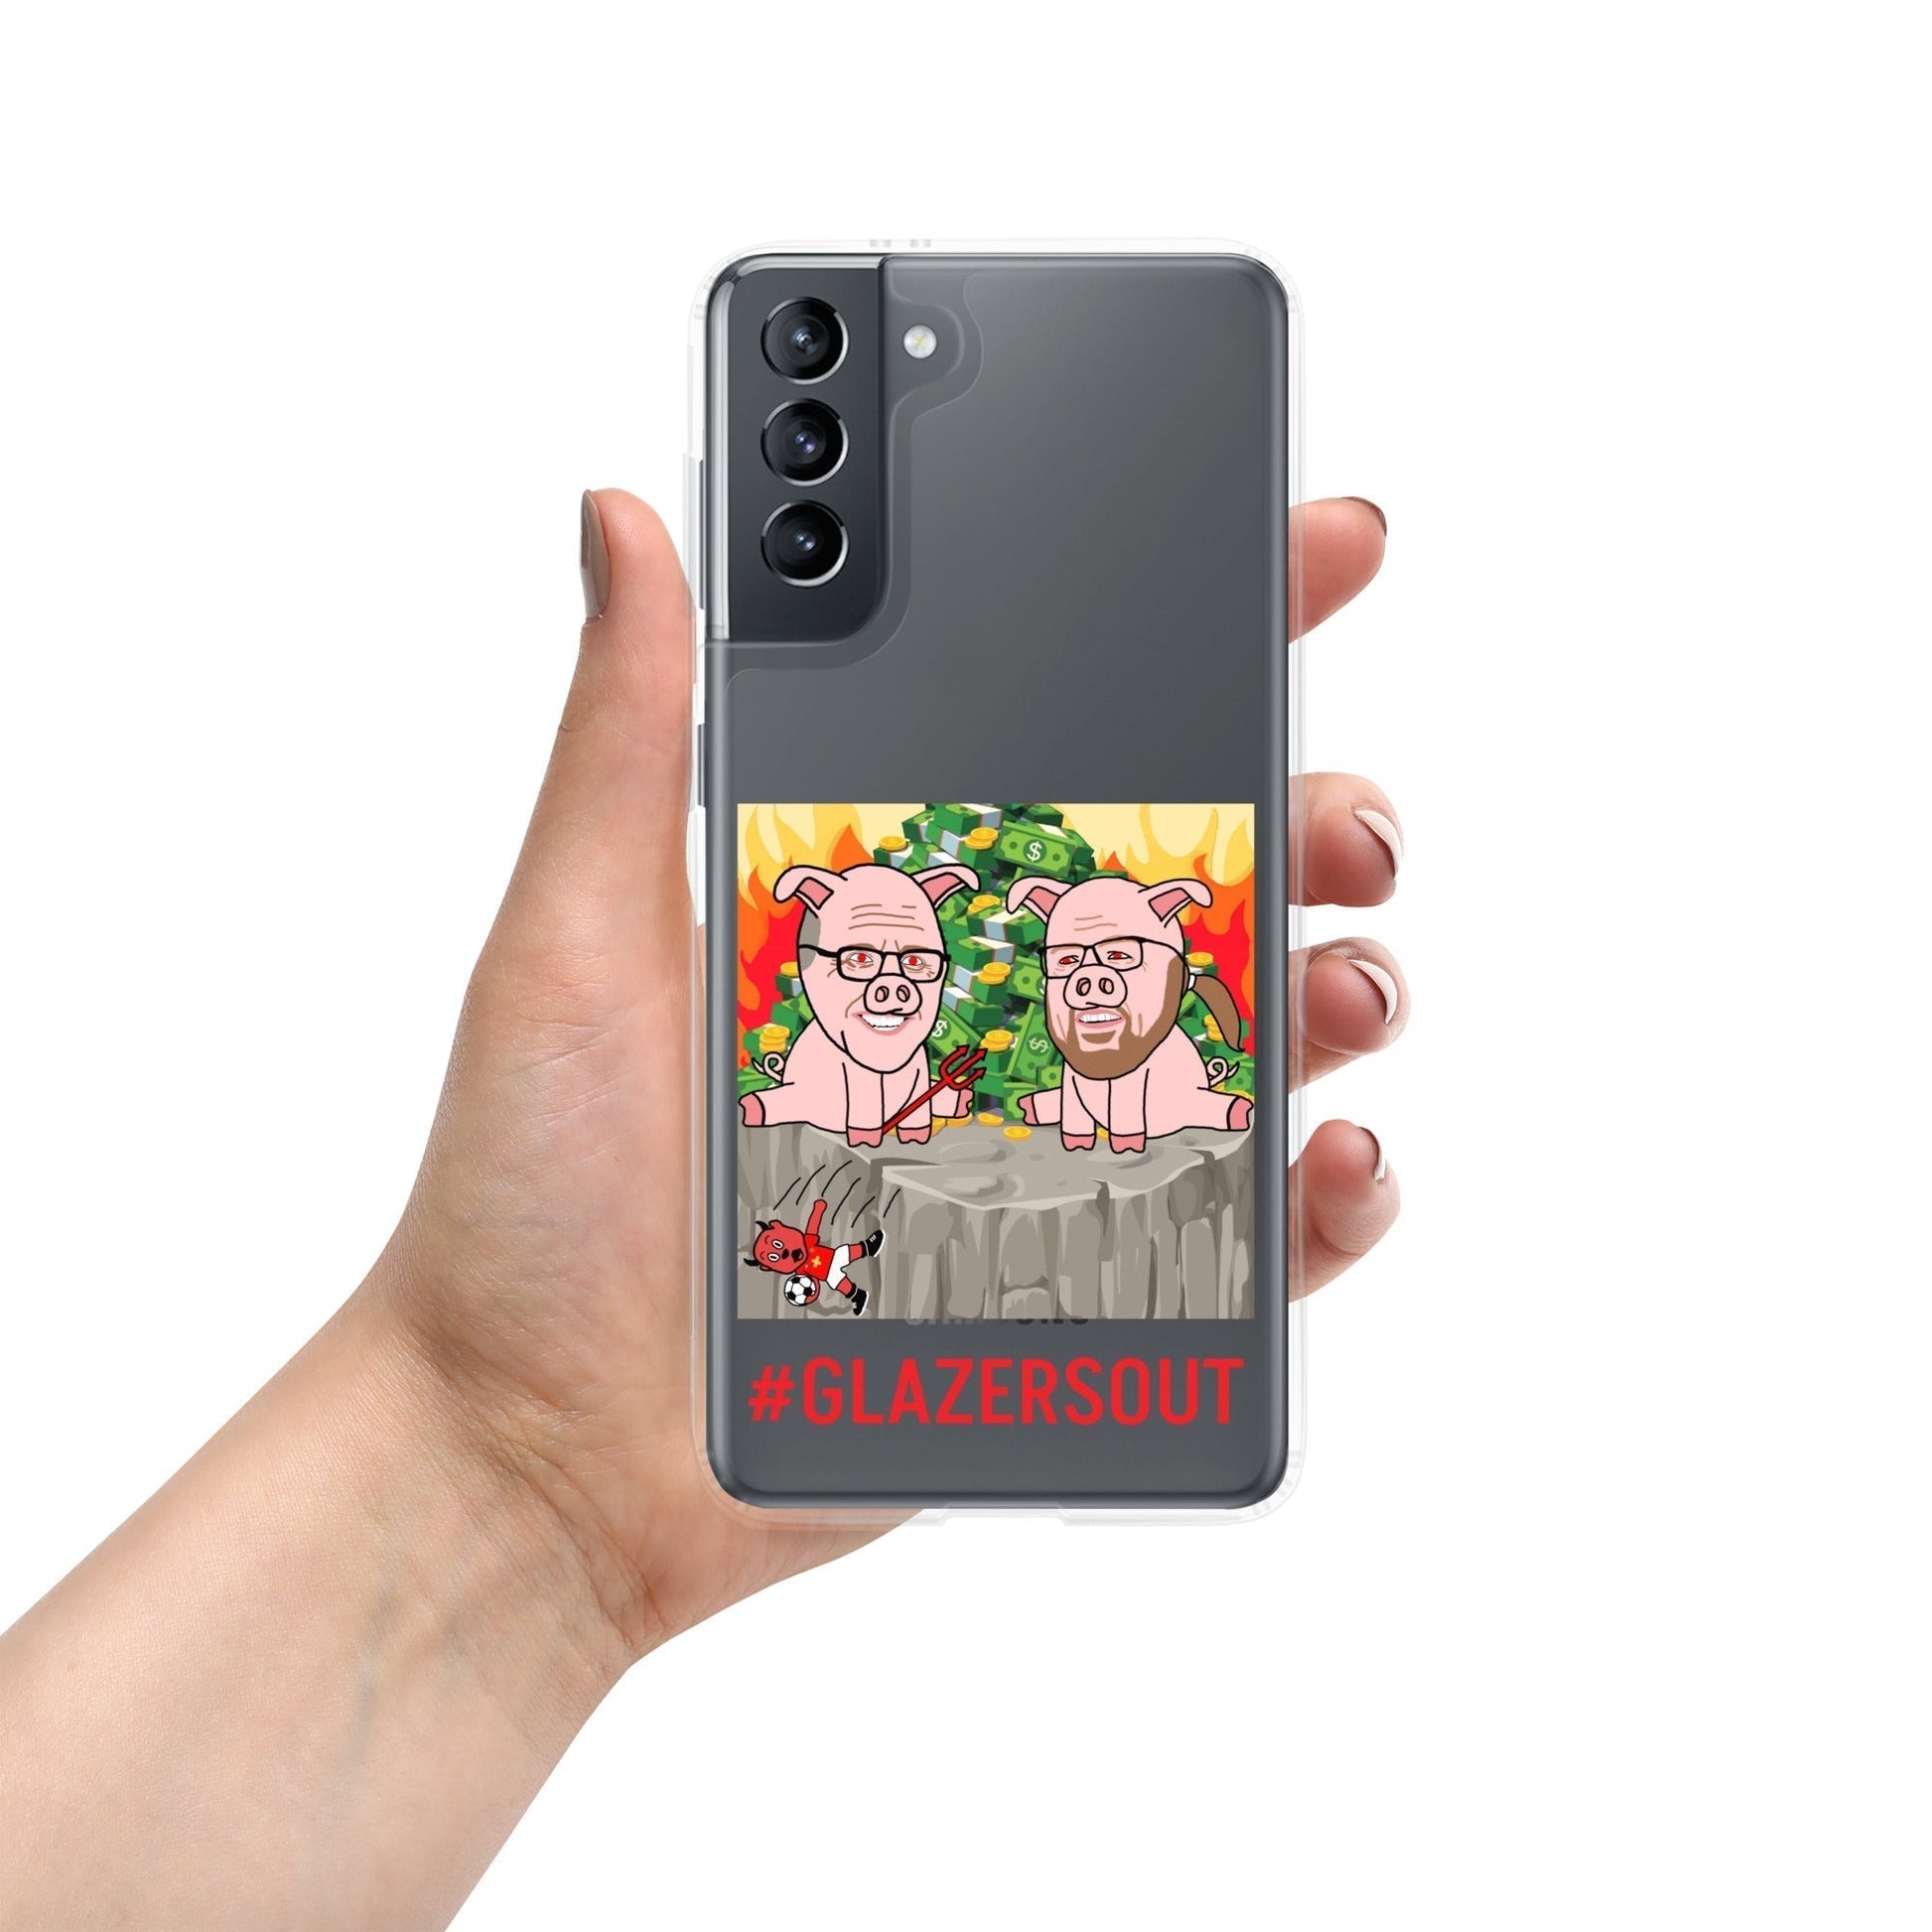 Glazers Out Manchester United Clear Case for Samsung®, #GlazersOut Next Cult Brand Football, GlazersOut, Manchester United